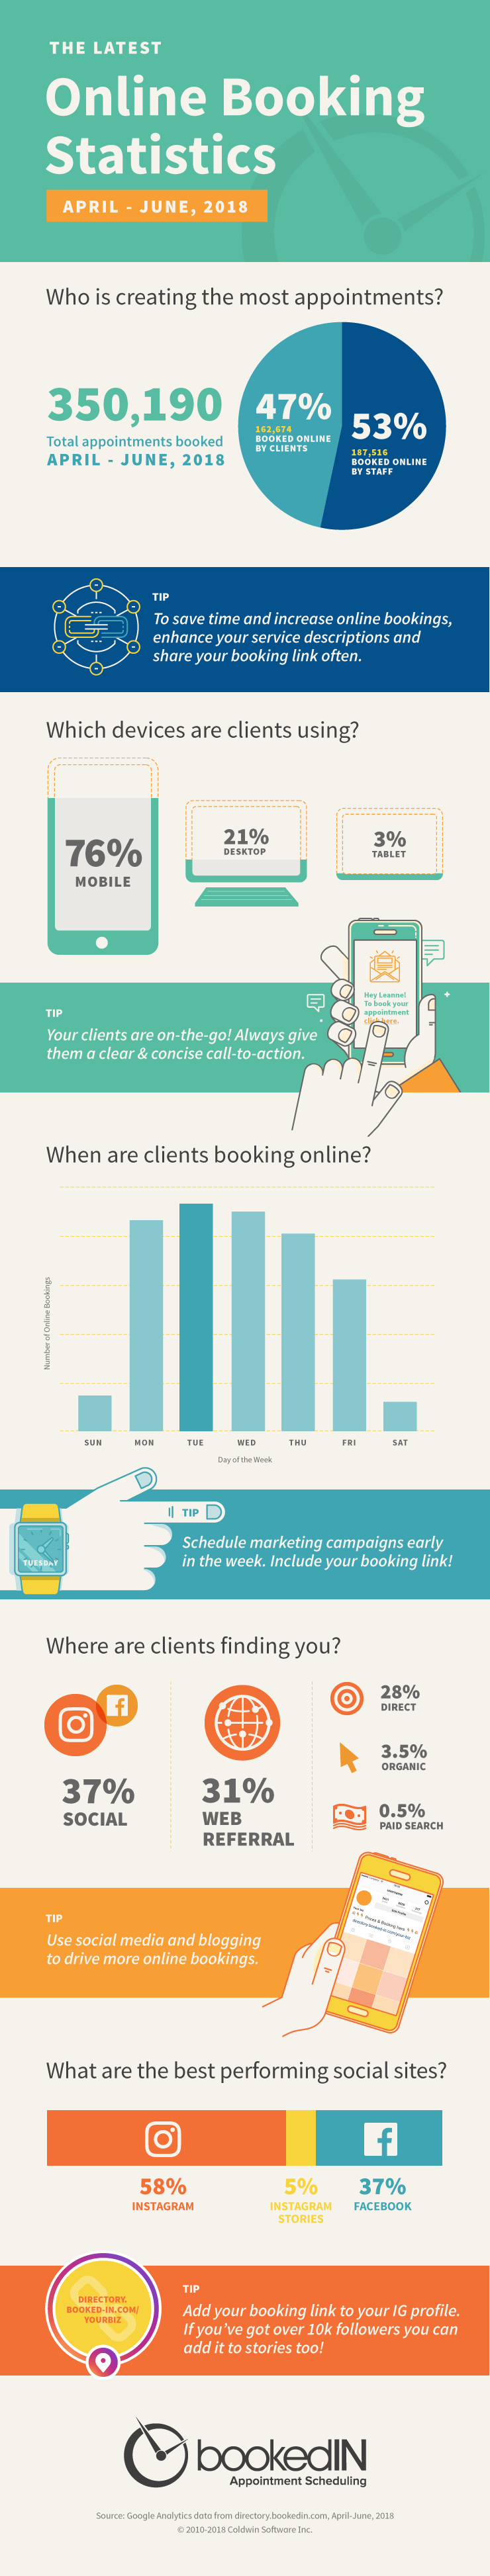 online appointment booking infographic 2018